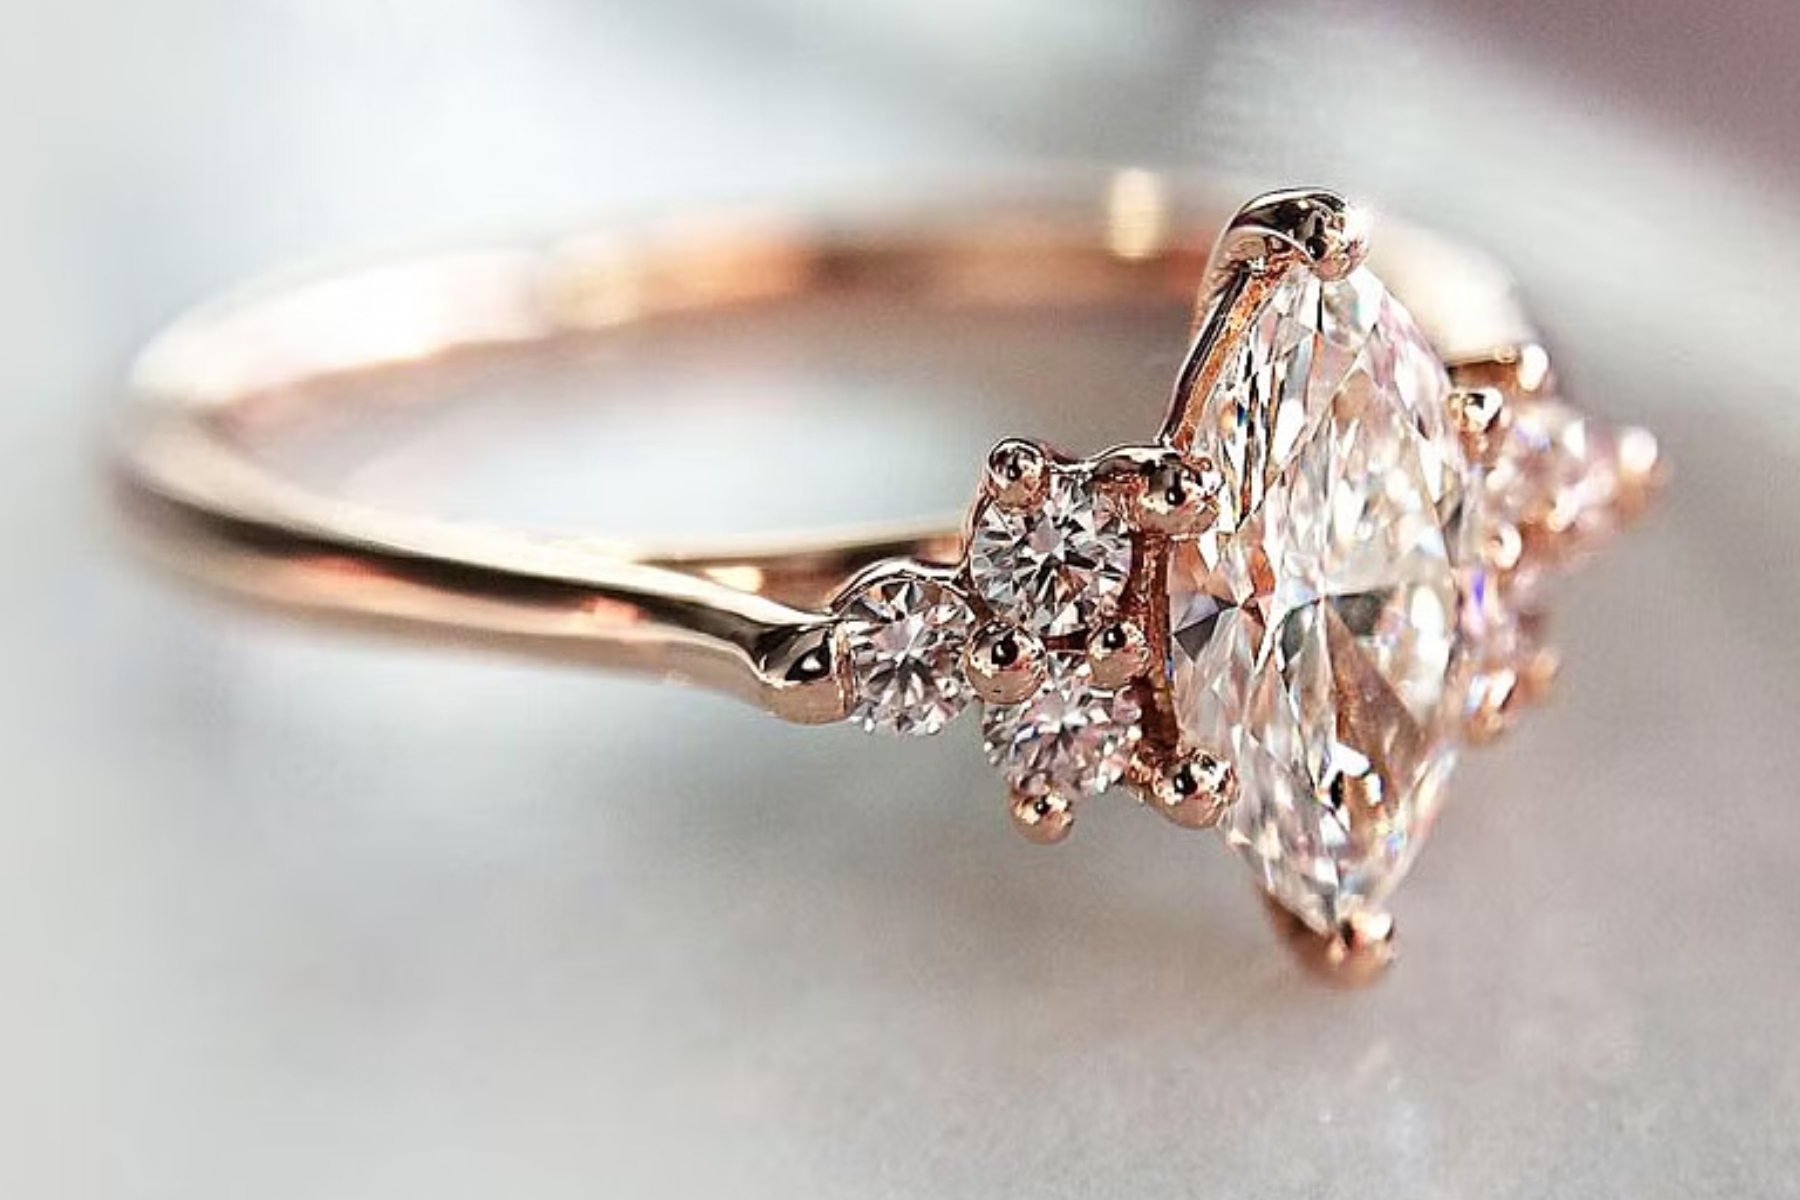 Rose Gold Rings - A True Beauty For Any Occasion